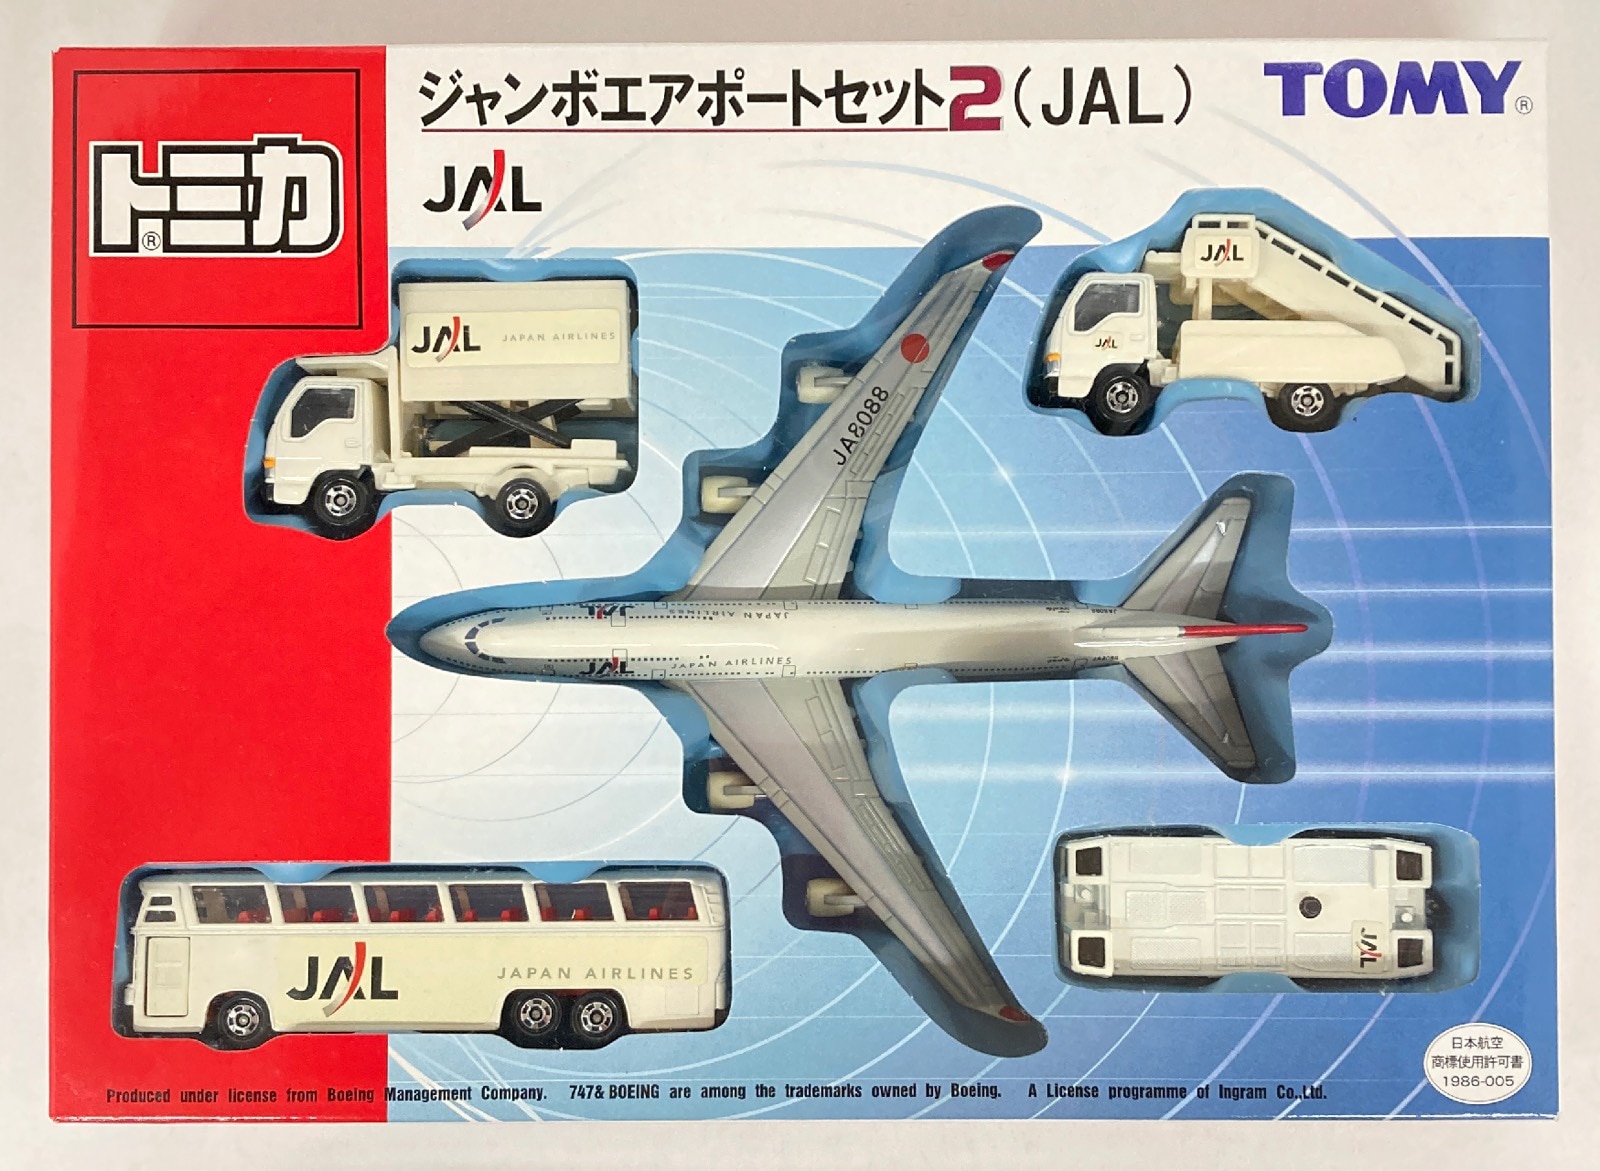 TOMY トミカギフトセット トミカ ジャンボエアポートセット2(JAL) ST05 ...